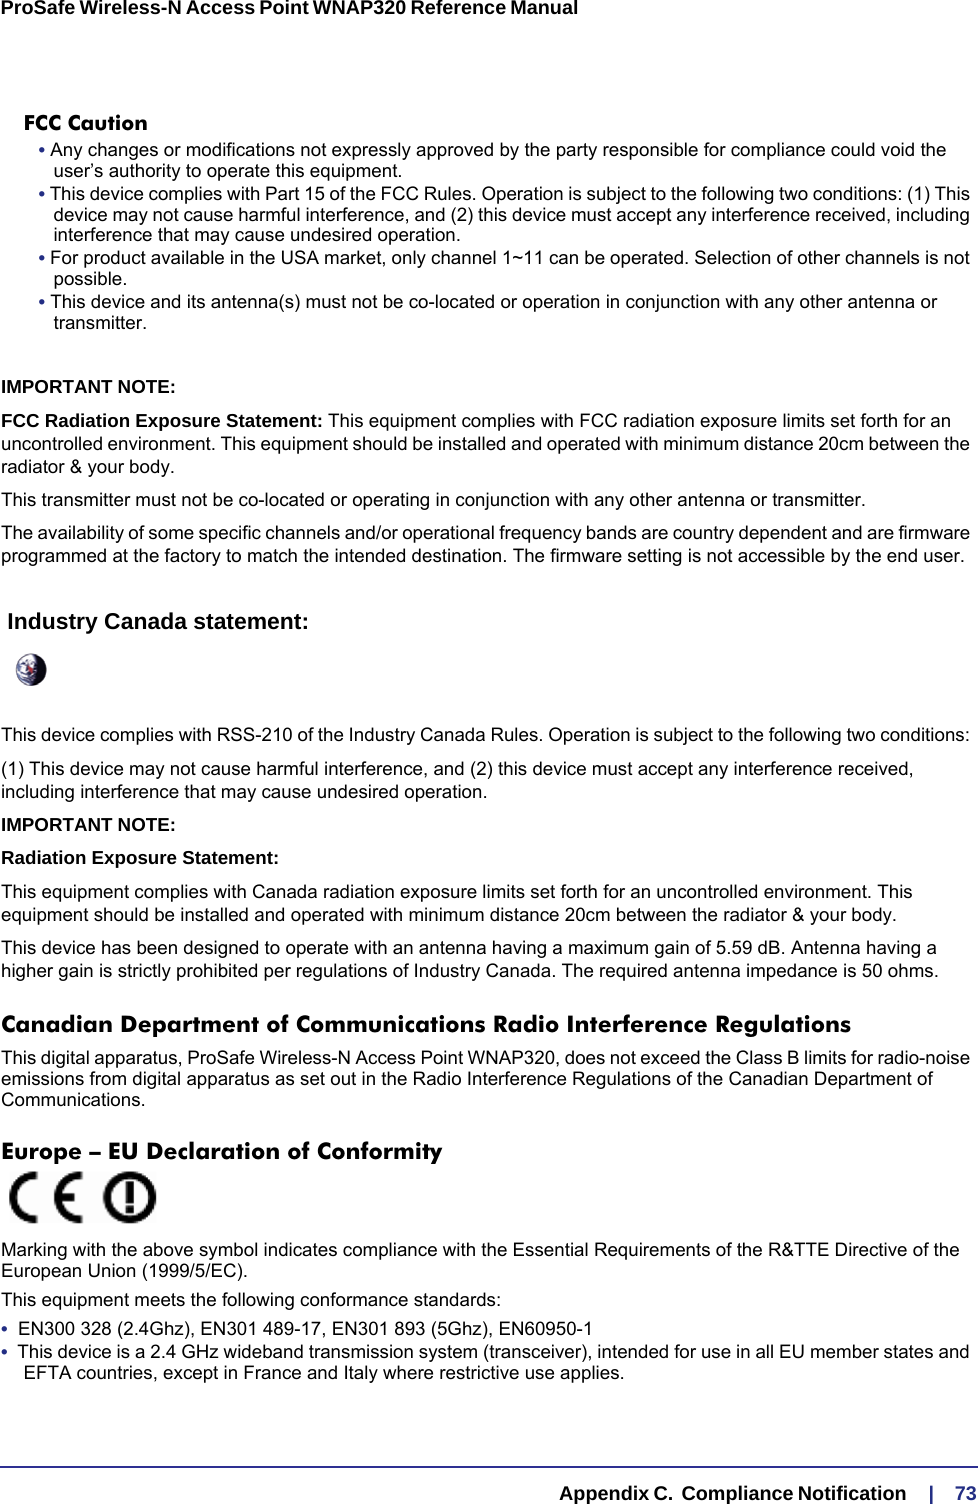   Appendix C.  Compliance Notification     |    73ProSafe Wireless-N Access Point WNAP320 Reference Manual FCC Caution• Any changes or modifications not expressly approved by the party responsible for compliance could void the user’s authority to operate this equipment. • This device complies with Part 15 of the FCC Rules. Operation is subject to the following two conditions: (1) This device may not cause harmful interference, and (2) this device must accept any interference received, including interference that may cause undesired operation. • For product available in the USA market, only channel 1~11 can be operated. Selection of other channels is not possible.• This device and its antenna(s) must not be co-located or operation in conjunction with any other antenna or transmitter.IMPORTANT NOTE:FCC Radiation Exposure Statement: This equipment complies with FCC radiation exposure limits set forth for an uncontrolled environment. This equipment should be installed and operated with minimum distance 20cm between the radiator &amp; your body.This transmitter must not be co-located or operating in conjunction with any other antenna or transmitter.The availability of some specific channels and/or operational frequency bands are country dependent and are firmware programmed at the factory to match the intended destination. The firmware setting is not accessible by the end user. Industry Canada statement:This device complies with RSS-210 of the Industry Canada Rules. Operation is subject to the following two conditions: (1) This device may not cause harmful interference, and (2) this device must accept any interference received, including interference that may cause undesired operation.IMPORTANT NOTE:Radiation Exposure Statement:This equipment complies with Canada radiation exposure limits set forth for an uncontrolled environment. This equipment should be installed and operated with minimum distance 20cm between the radiator &amp; your body.This device has been designed to operate with an antenna having a maximum gain of 5.59 dB. Antenna having a higher gain is strictly prohibited per regulations of Industry Canada. The required antenna impedance is 50 ohms.Canadian Department of Communications Radio Interference RegulationsThis digital apparatus, ProSafe Wireless-N Access Point WNAP320, does not exceed the Class B limits for radio-noise emissions from digital apparatus as set out in the Radio Interference Regulations of the Canadian Department of Communications.Europe – EU Declaration of Conformity Marking with the above symbol indicates compliance with the Essential Requirements of the R&amp;TTE Directive of the European Union (1999/5/EC). This equipment meets the following conformance standards:•  EN300 328 (2.4Ghz), EN301 489-17, EN301 893 (5Ghz), EN60950-1•  This device is a 2.4 GHz wideband transmission system (transceiver), intended for use in all EU member states and EFTA countries, except in France and Italy where restrictive use applies.